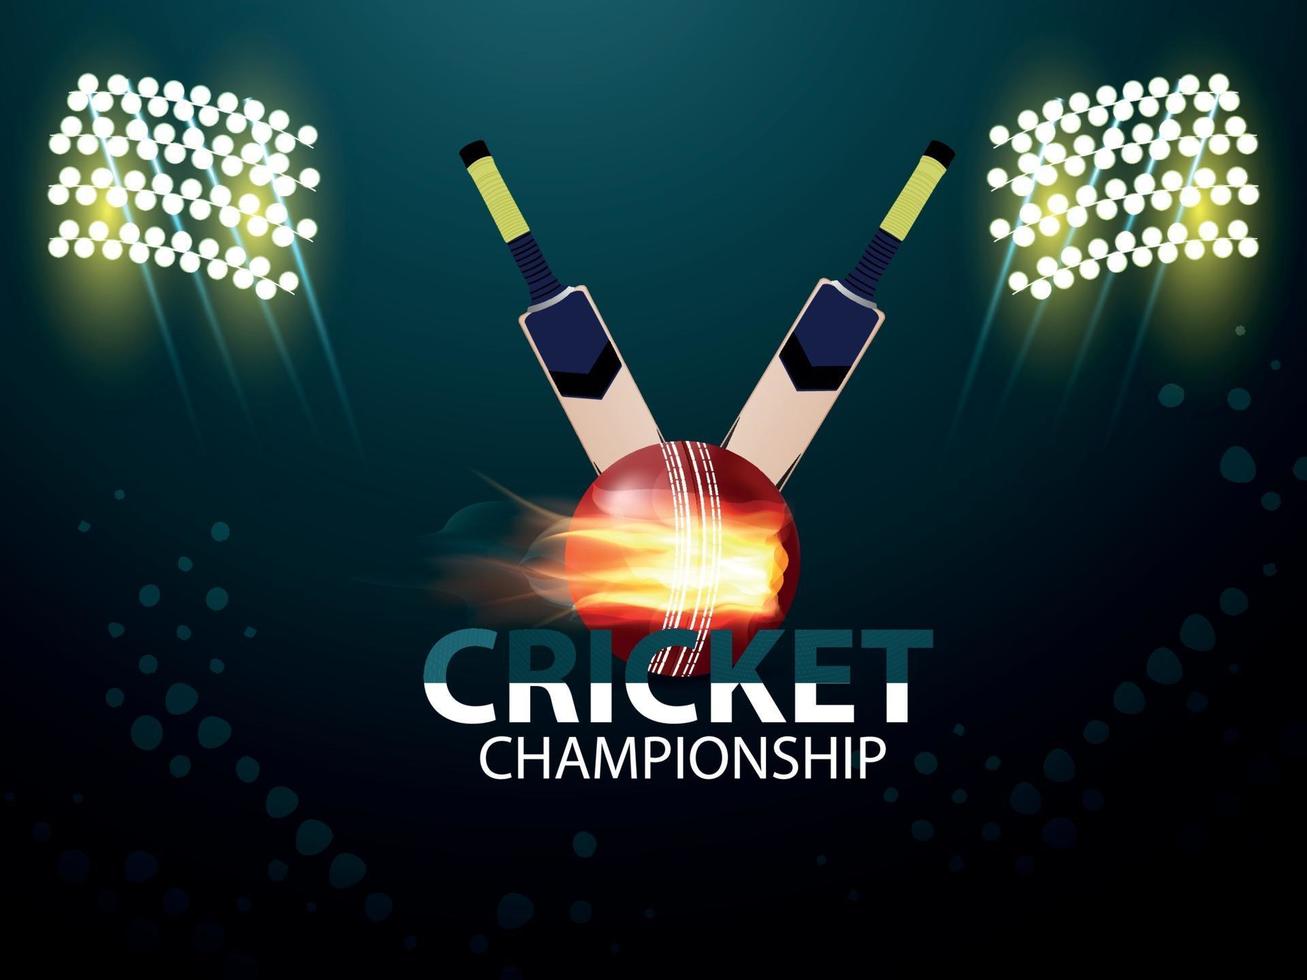 World championship tournament match with cricket equipment and stadium background vector